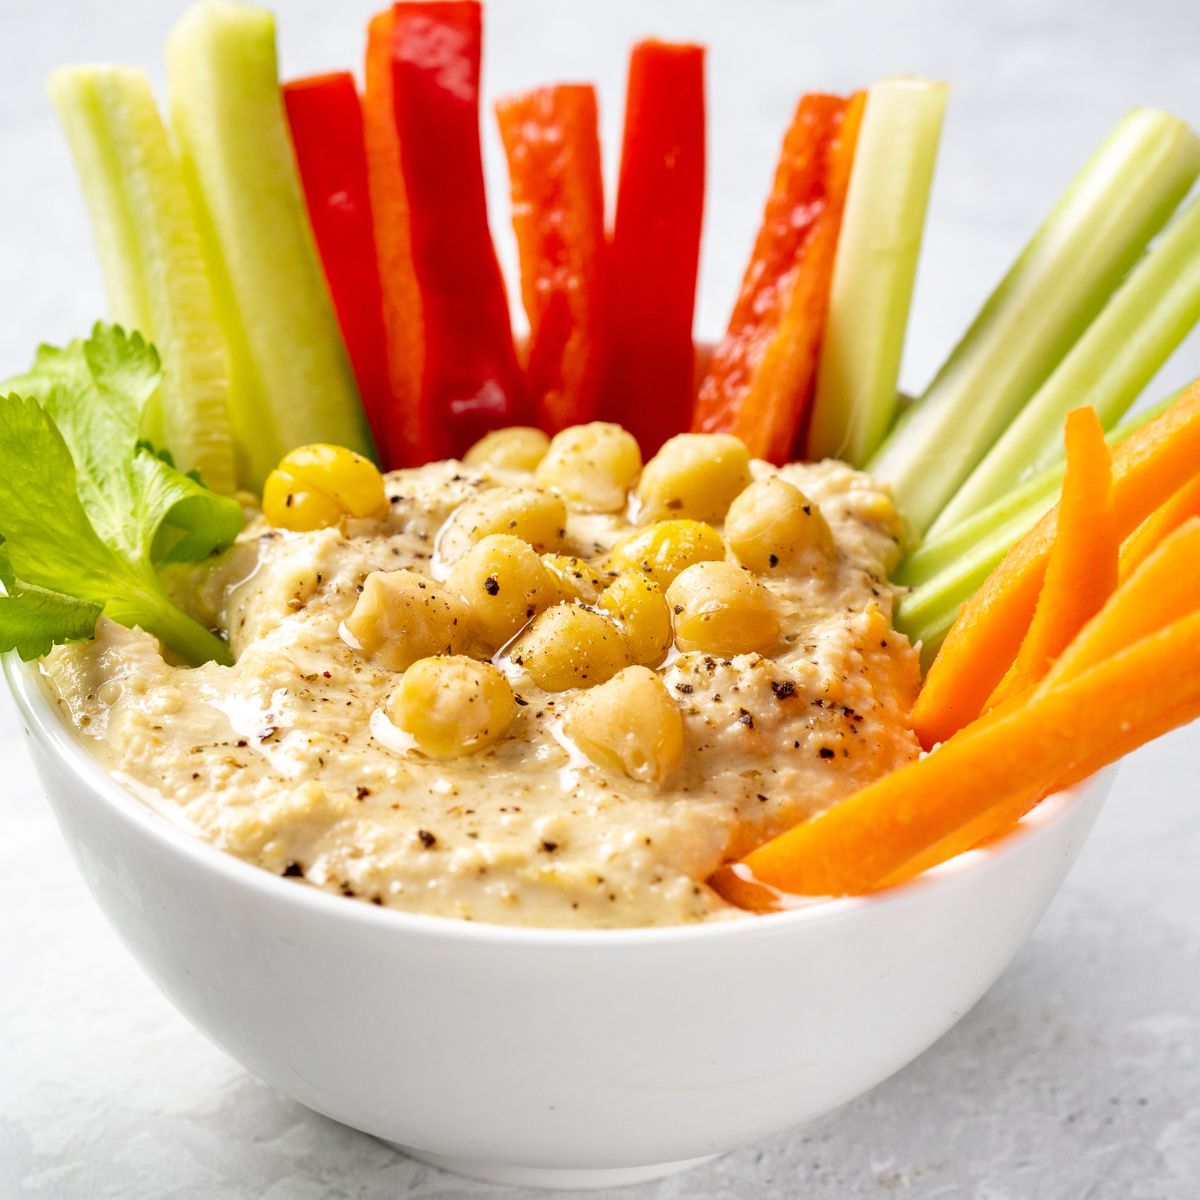 a bowl of hummus with fresh veggie sticks (carrots, celery, cucumber and red peppers).